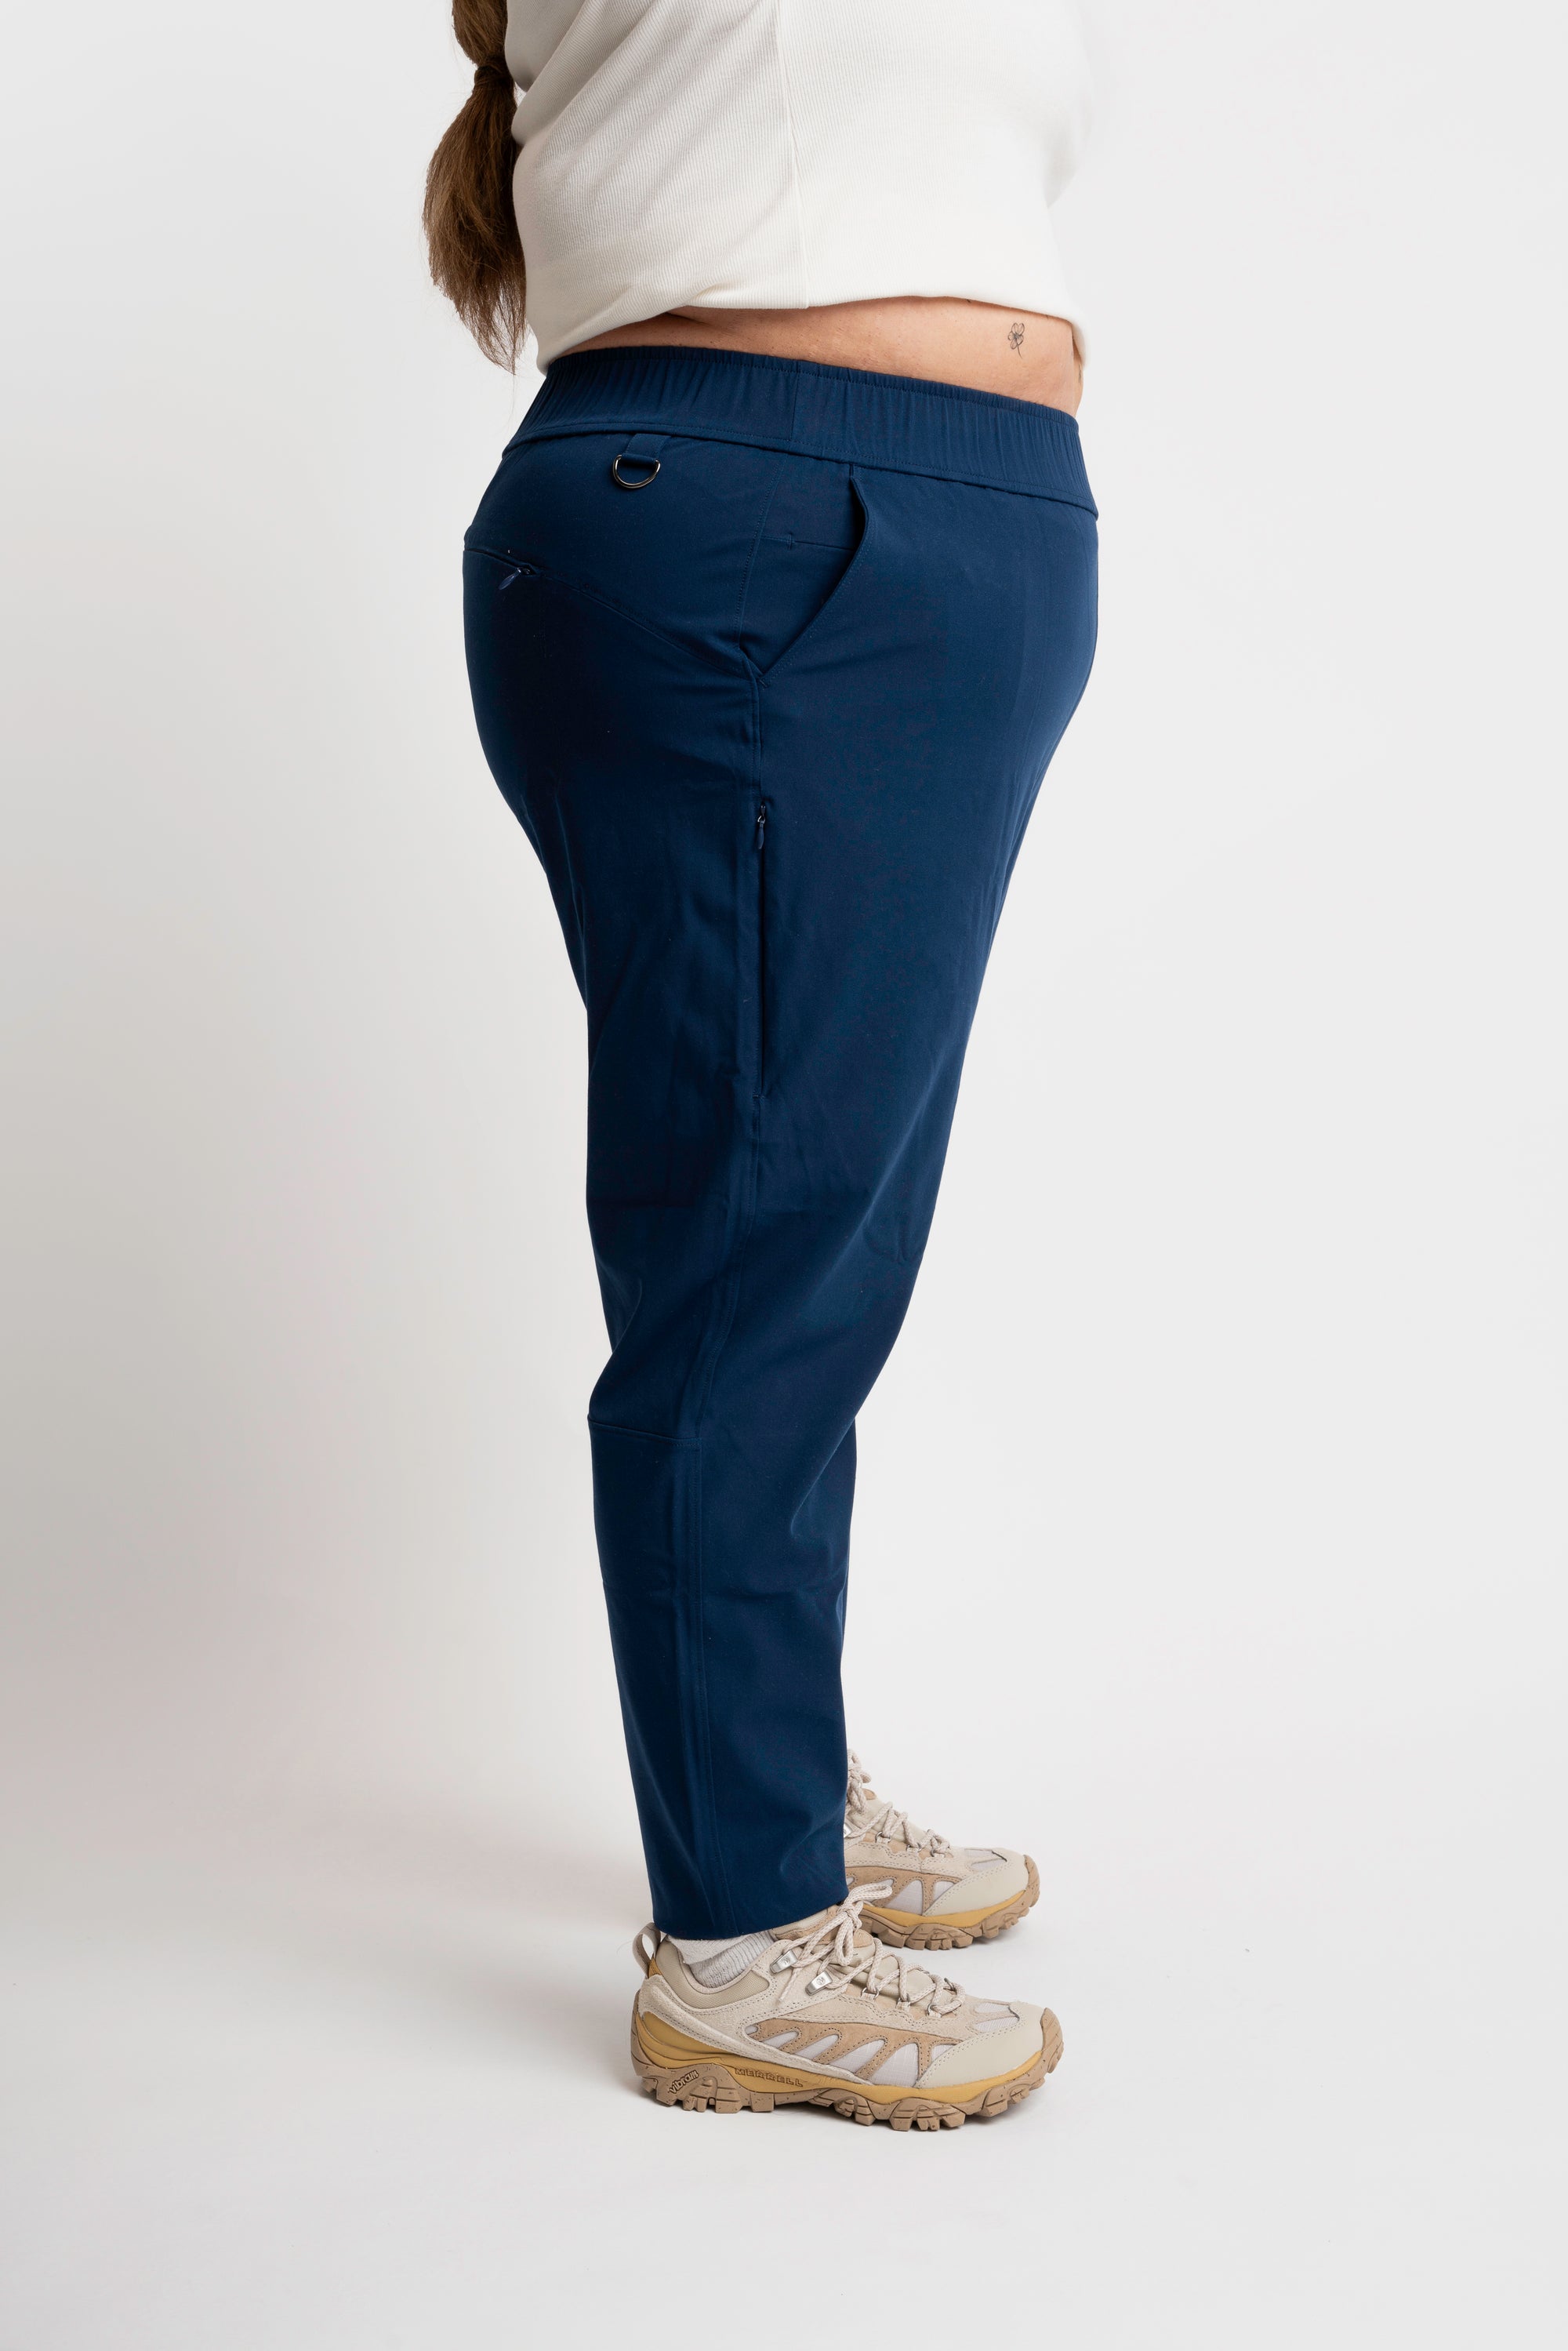 In-Motion Adjustable Woven Pant, Women's Pants